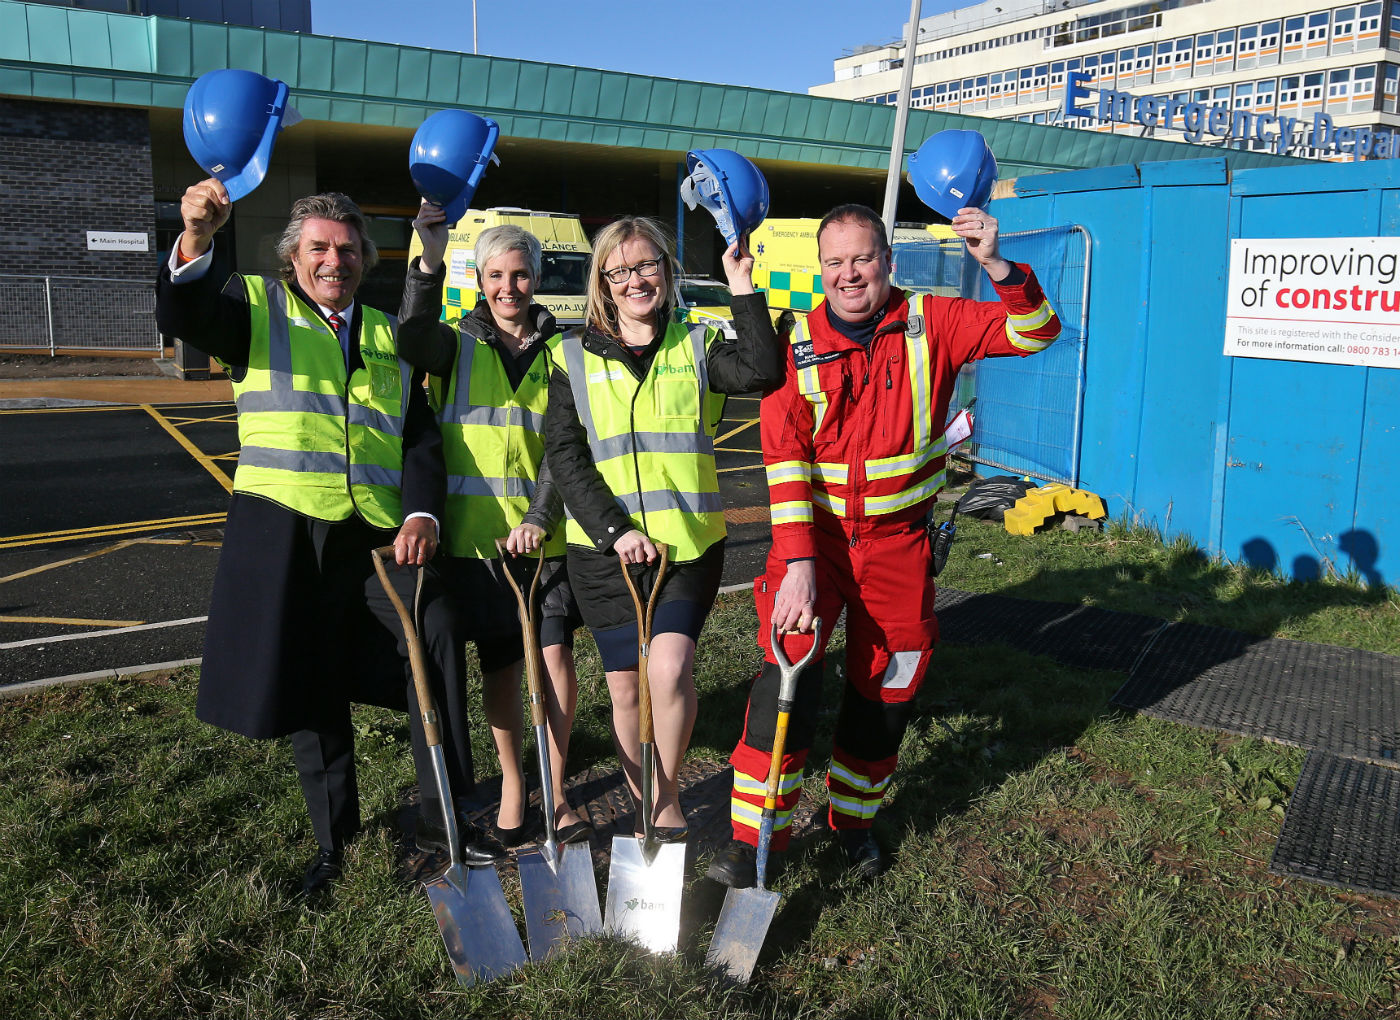 From left: Robert Bertram, chief executive, HELP Appeal; Sharon Scott, divisional medical director for surgery and anaesthesia, Aintree University Hospital; Catherine McMahon, consultant neurosurgeon, The Walton Centre; and Mark Evans, clinical service manager, North West Air Ambulance. HELP Appeal Photo